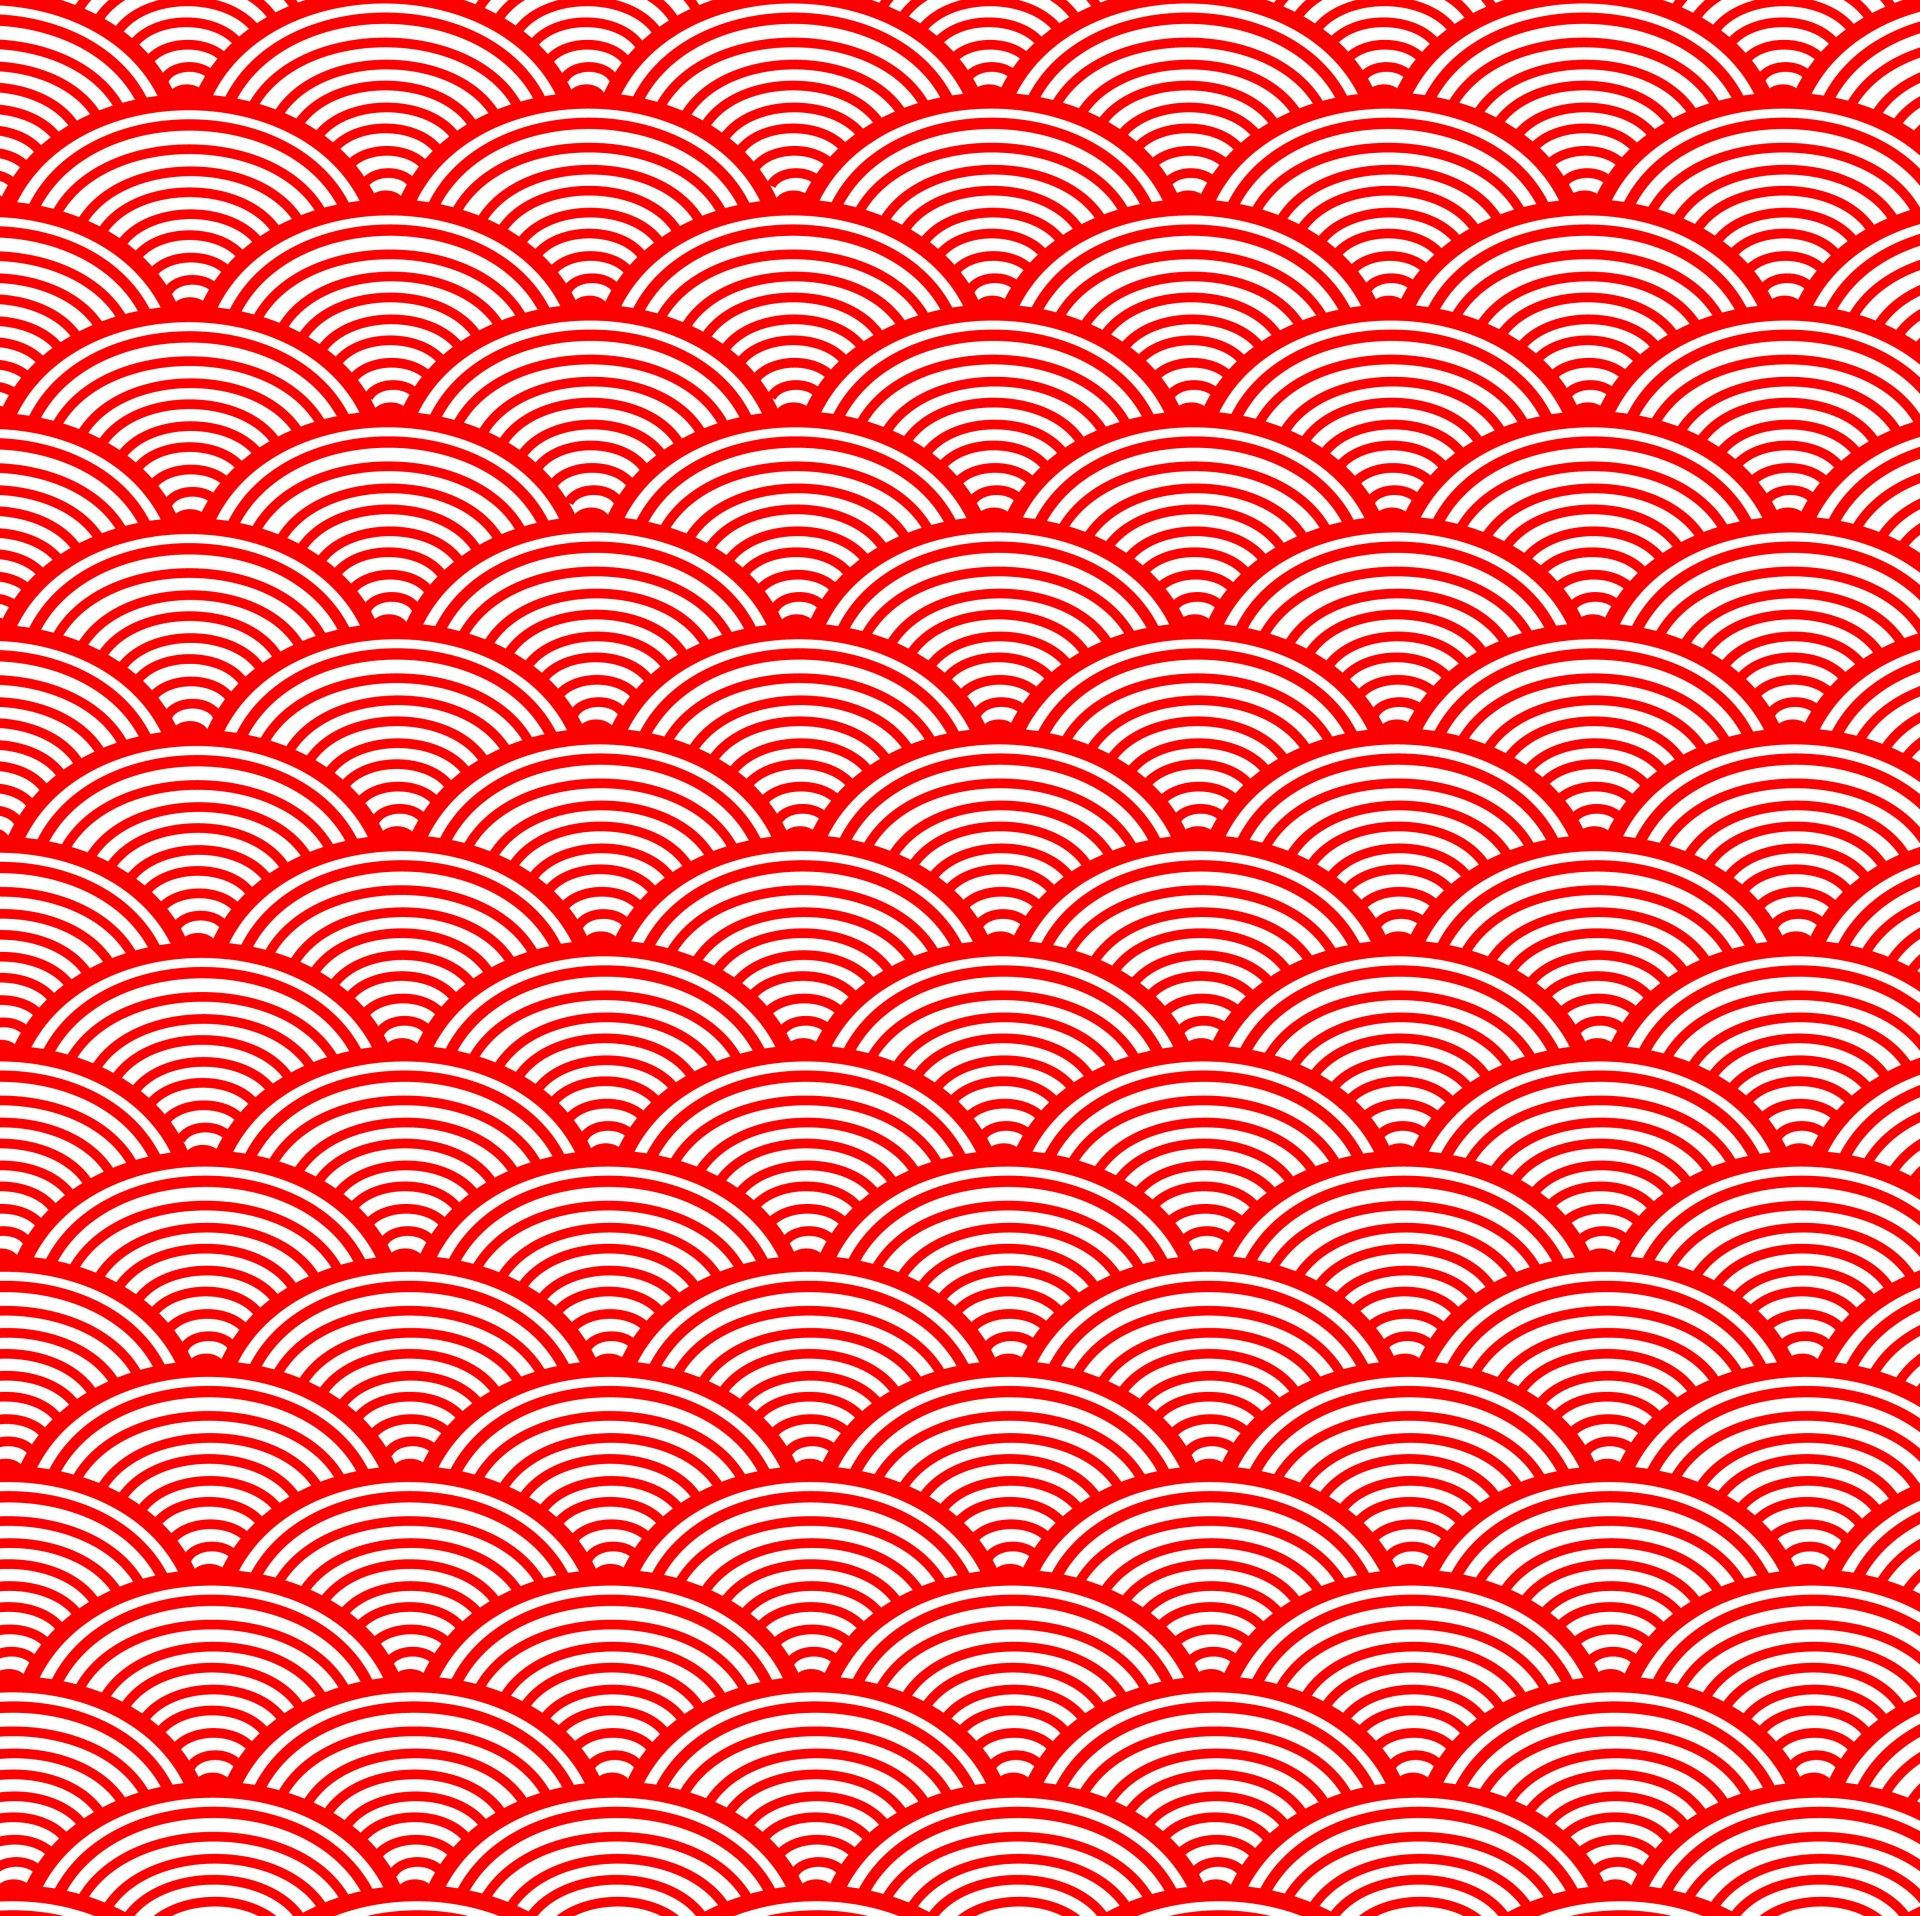 Majestic Red & White Japanese Waves Background